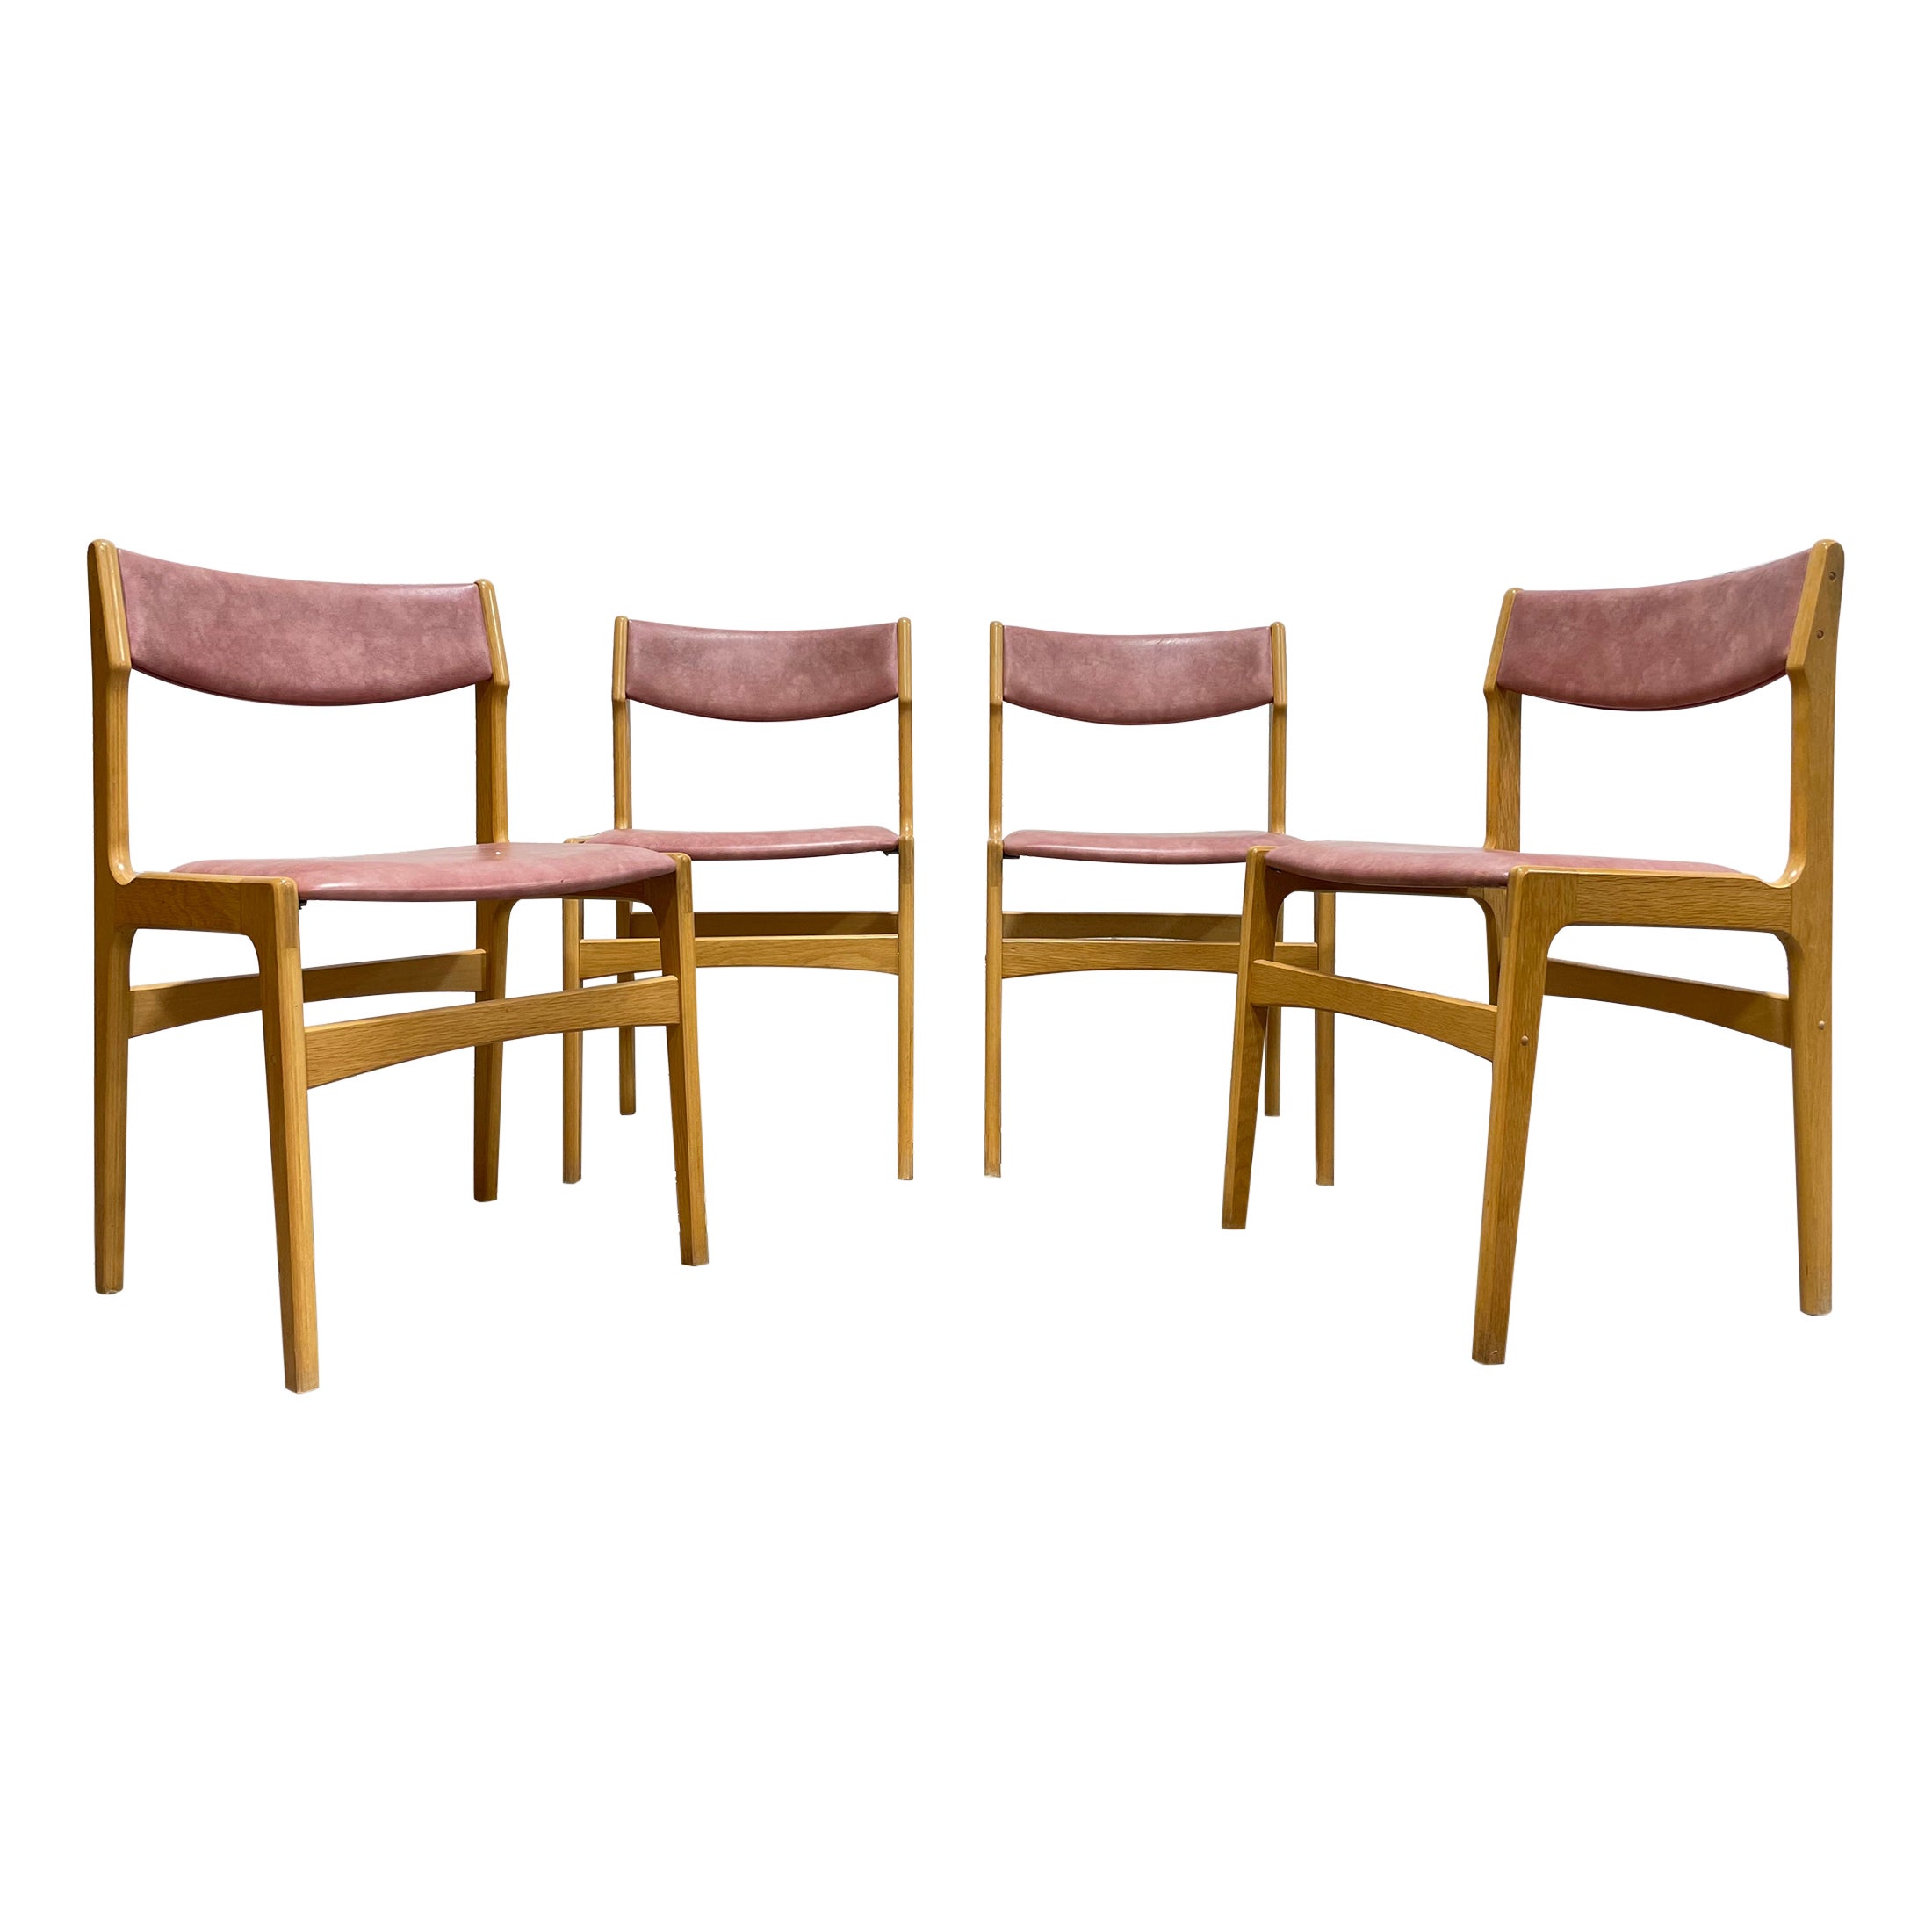 Mid Century MODERN Oak DINING CHAIRS Pink Upholstery, Set of 4 For Sale